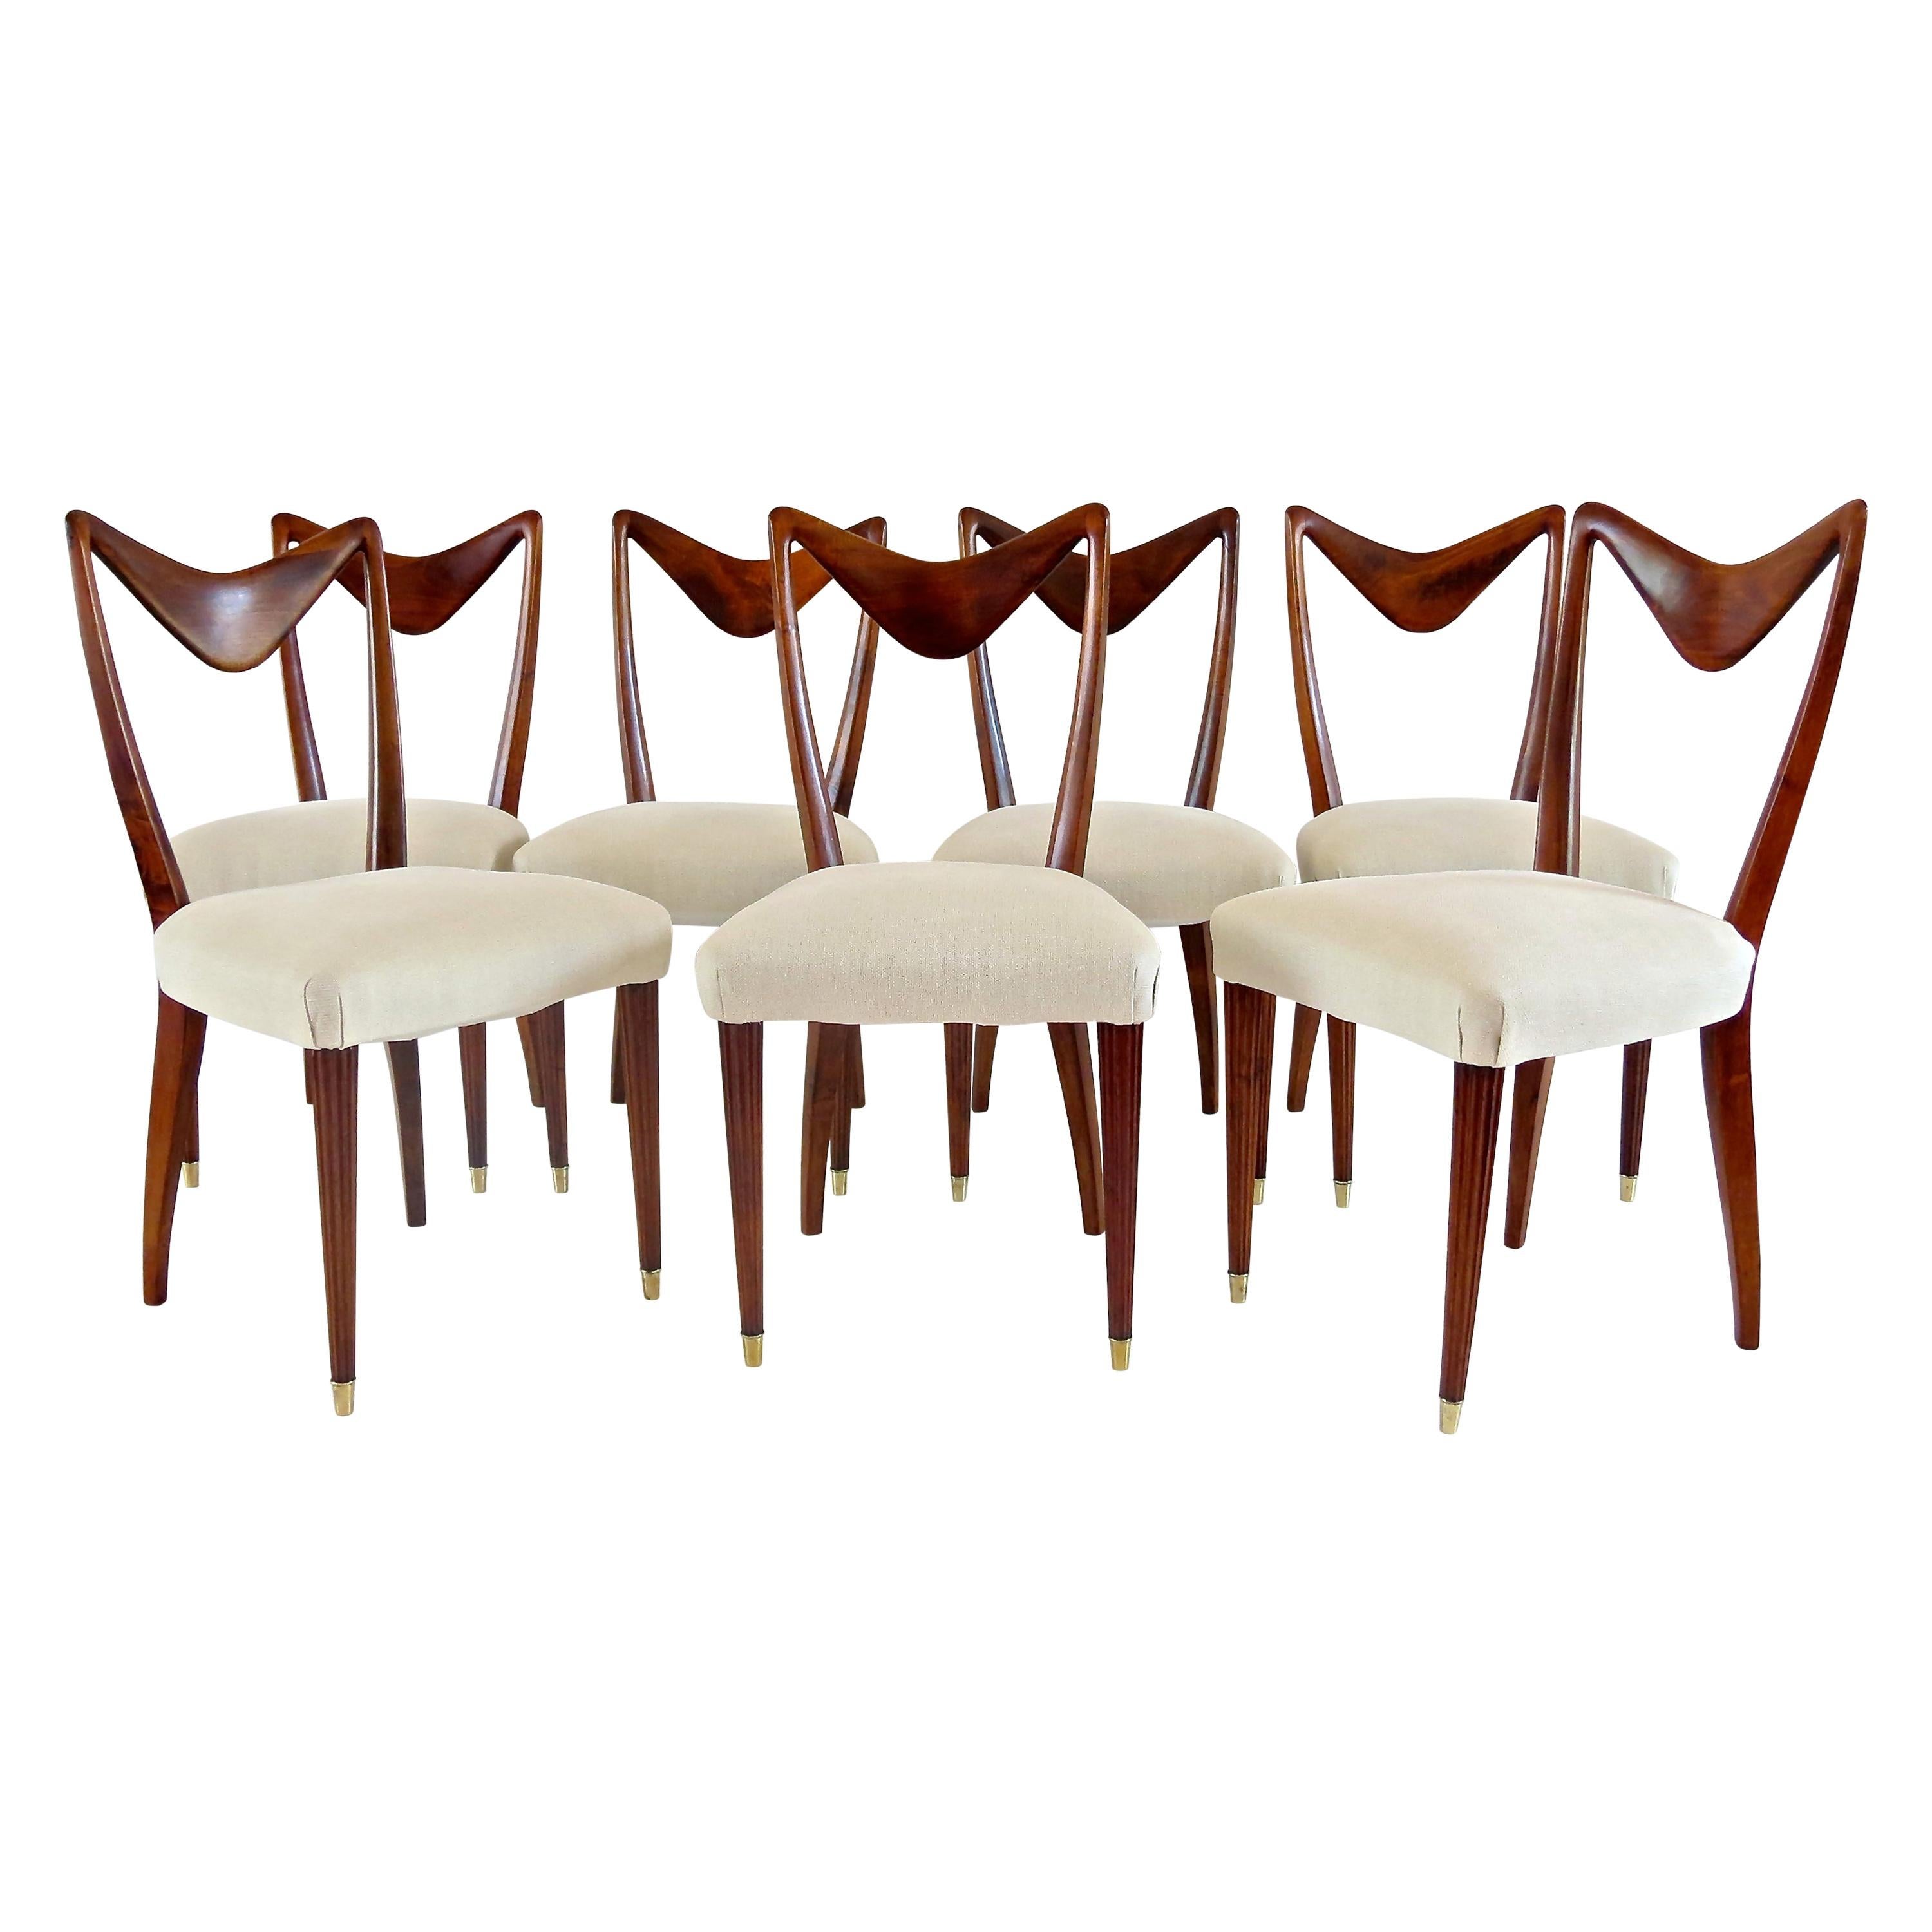 Set of Seven Walnut Dining Room Chairs by Arch, Carlo Enrico Rava, Milano, 1940